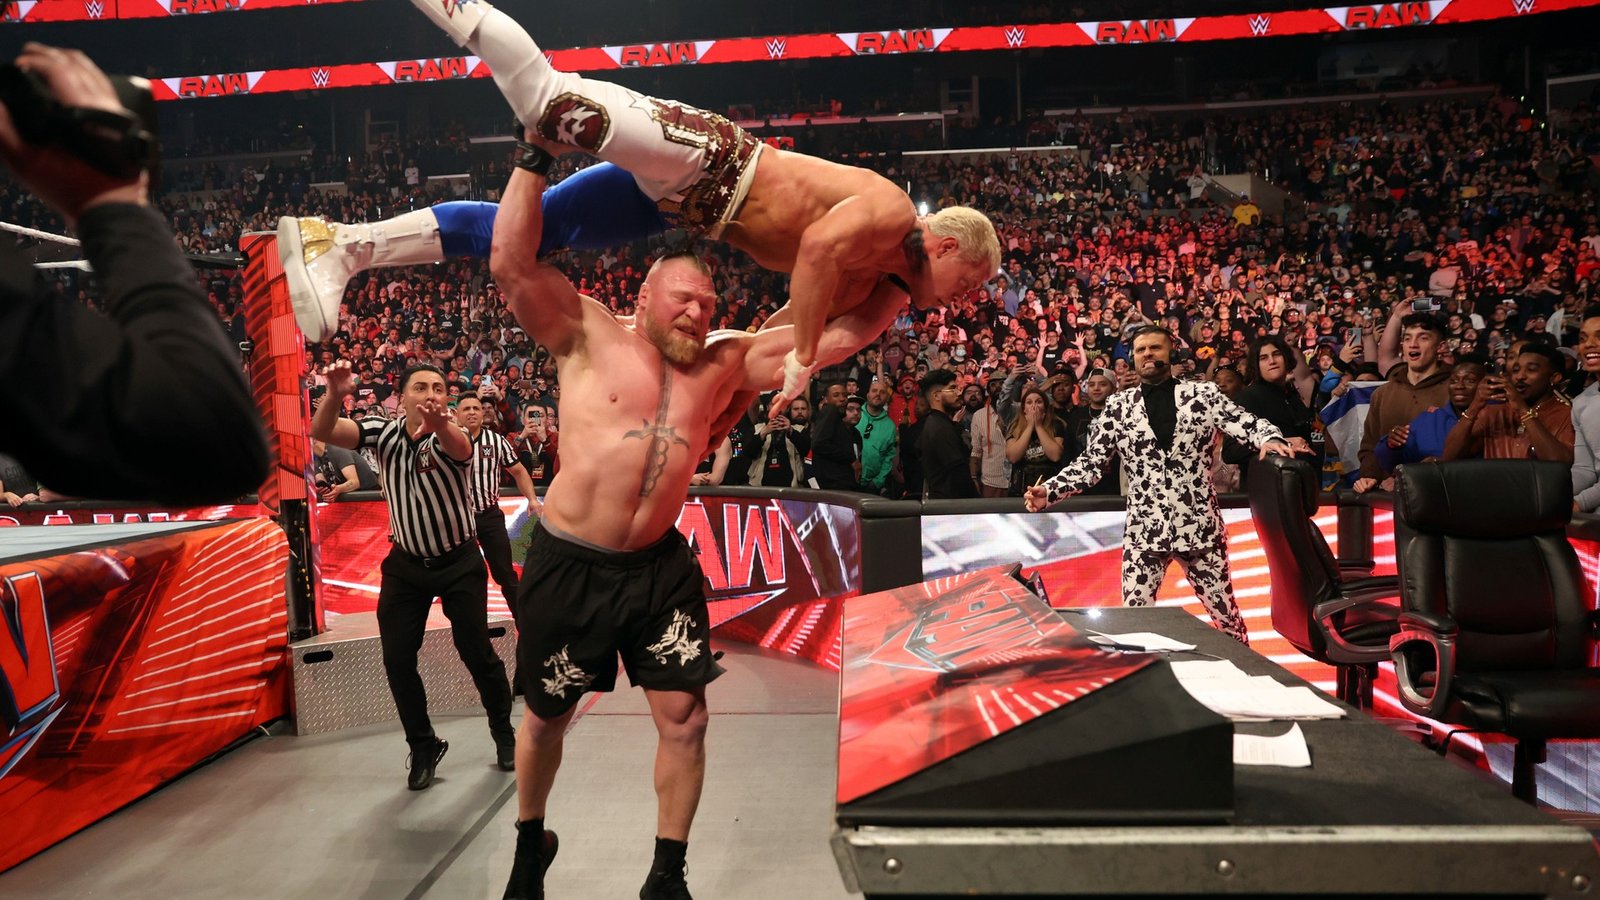 Experts opinion on the unique fued in between Brock Lesnar and Cody Rhodes